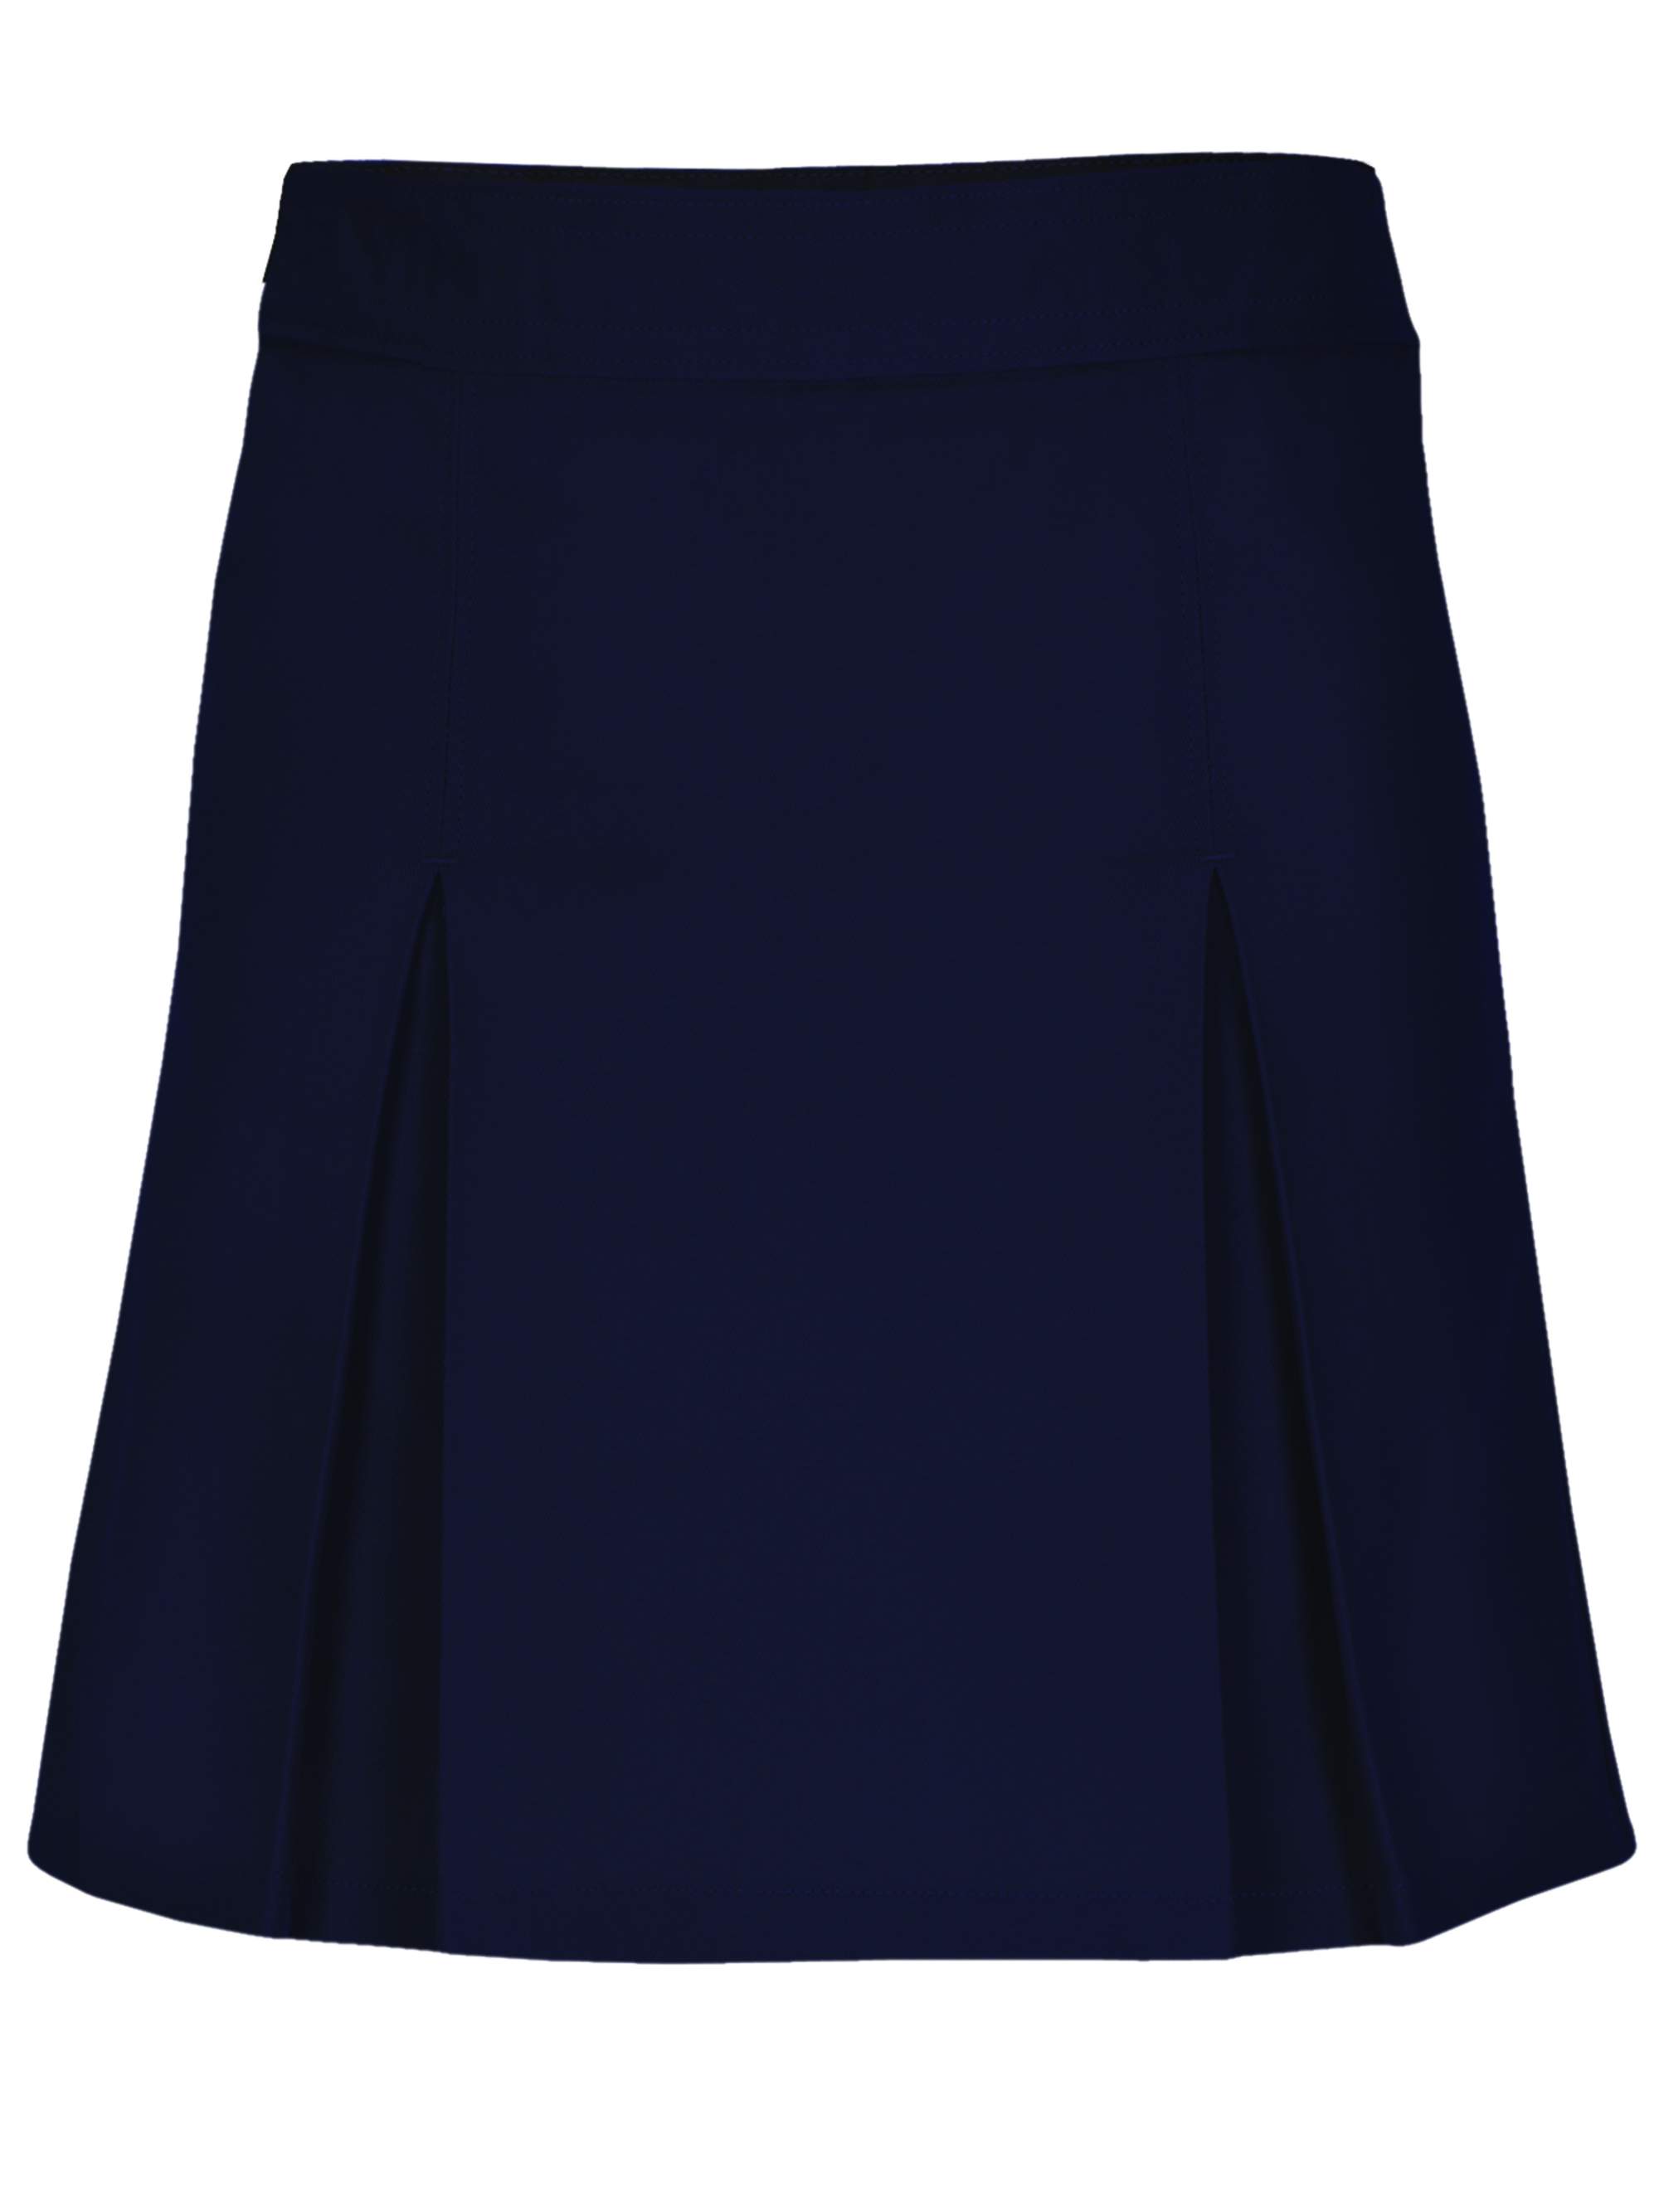 Real School Girls School Uniform Pleat Front Scooter Skirt, Sizes 4-16 & Plus - image 1 of 6